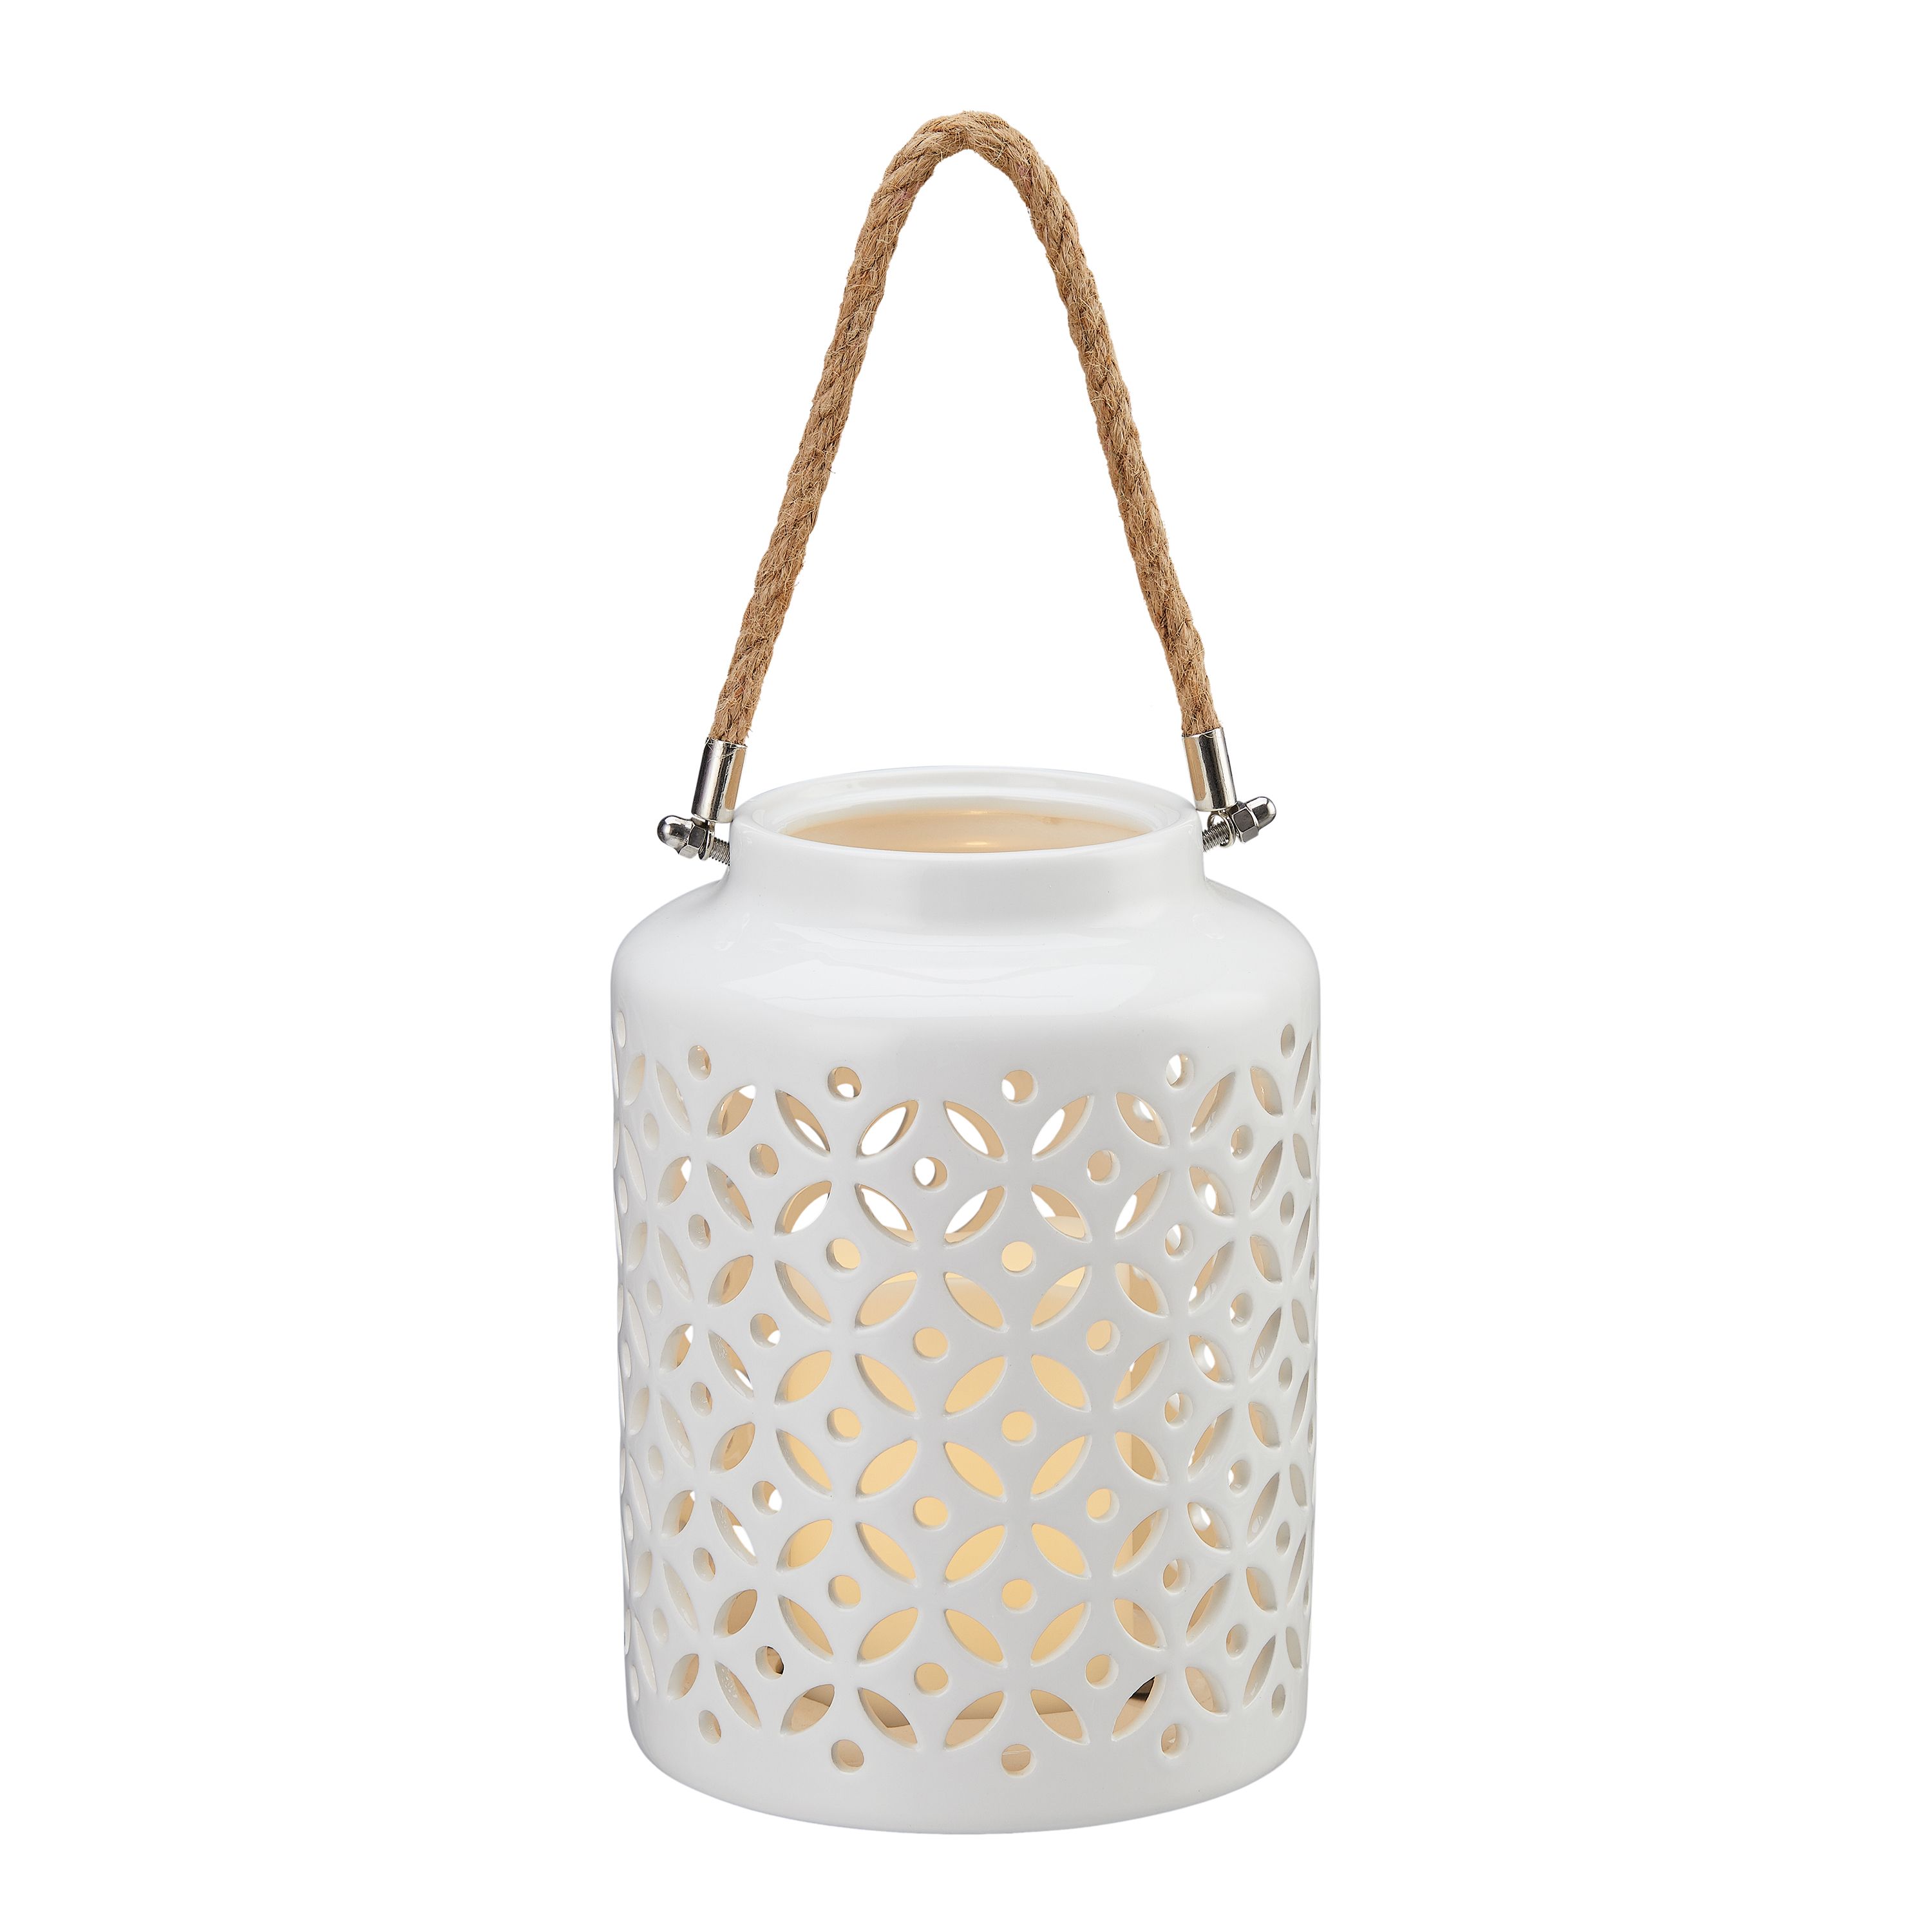 Better Homes & Gardens 8" White Ceramic Lantern with Removable Flickering Candle | Walmart (US)